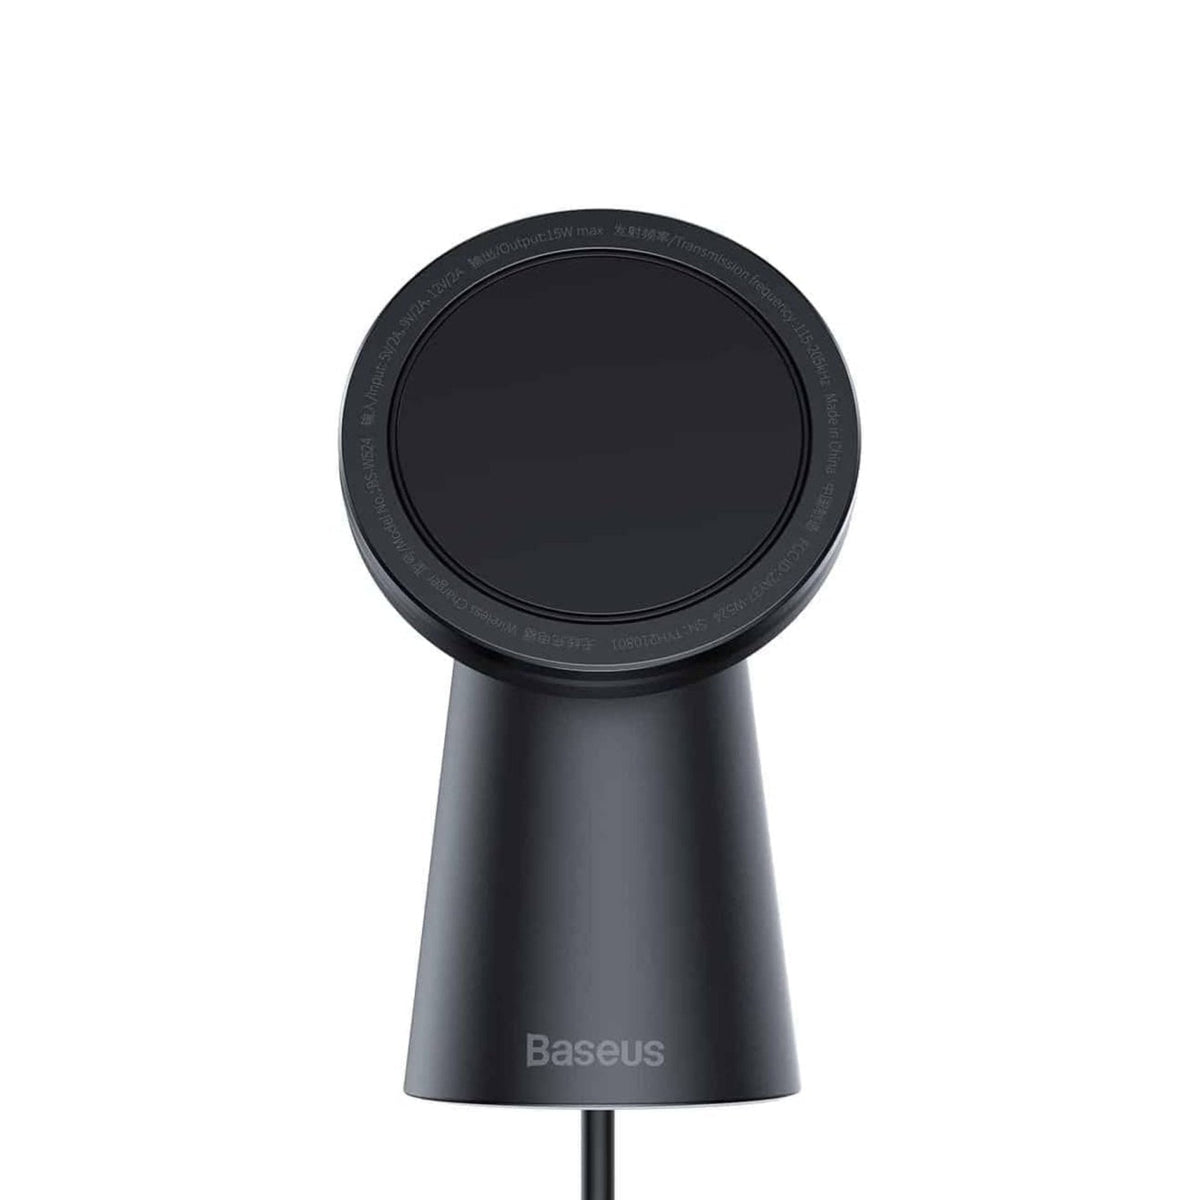 Baseus Simple Magnetic Stand Wireless Charger 15W - Black